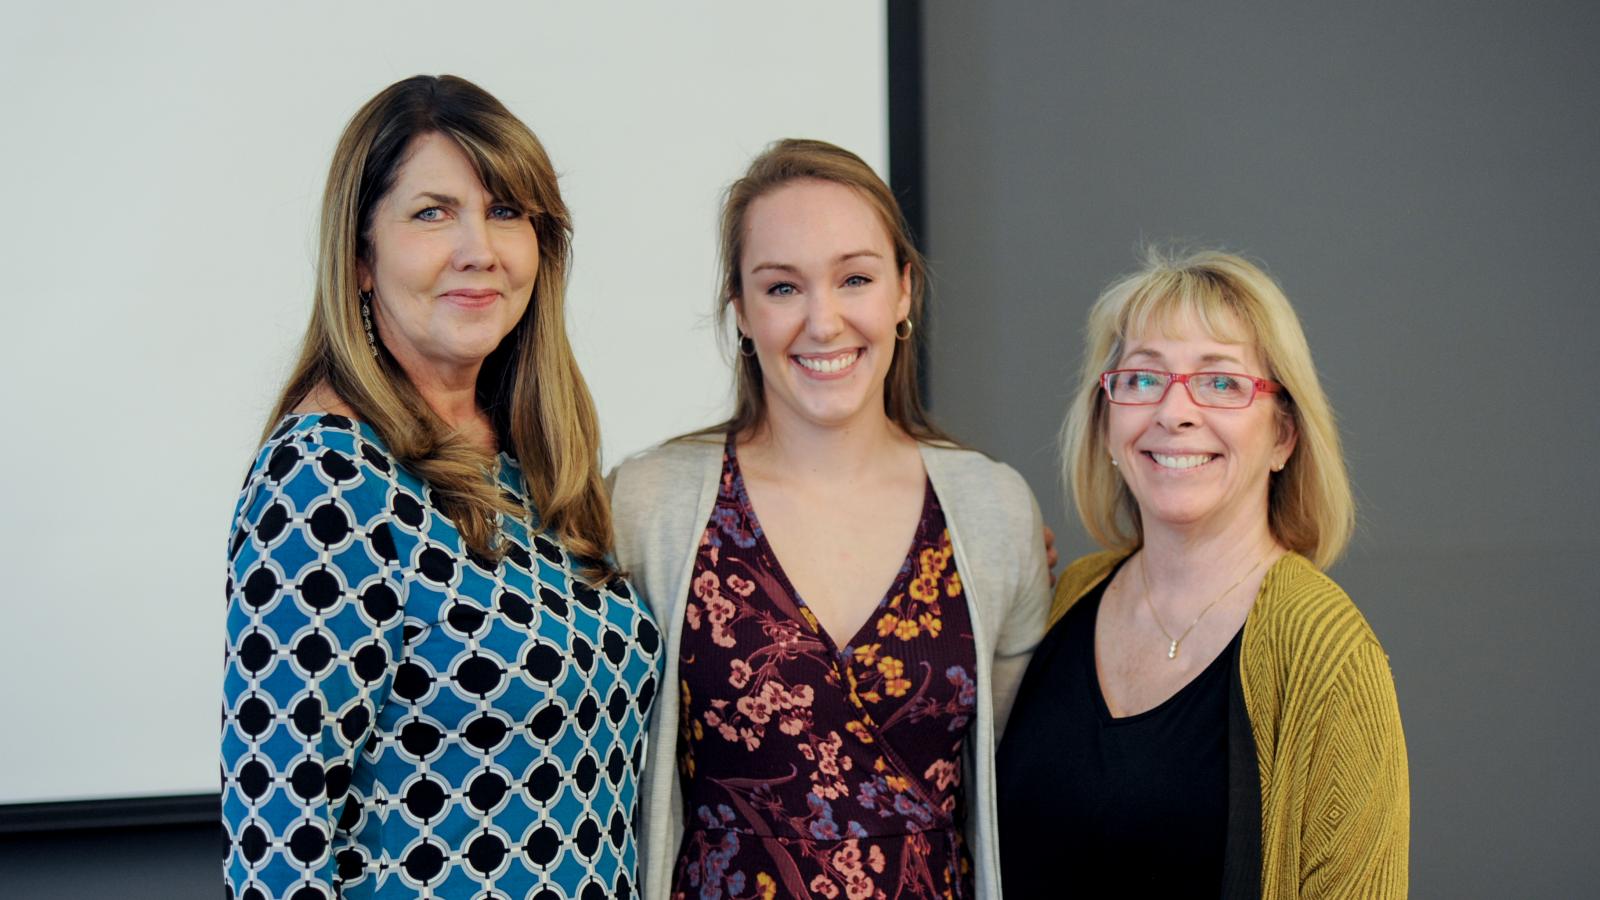 2018 AAEP Outstanding GTA and Graduate Associate Teaching Award winner Elle Pierman (center) with course advisors Dr. Shari Savage (left) and Dr. Christine Ballengee Morris (right)